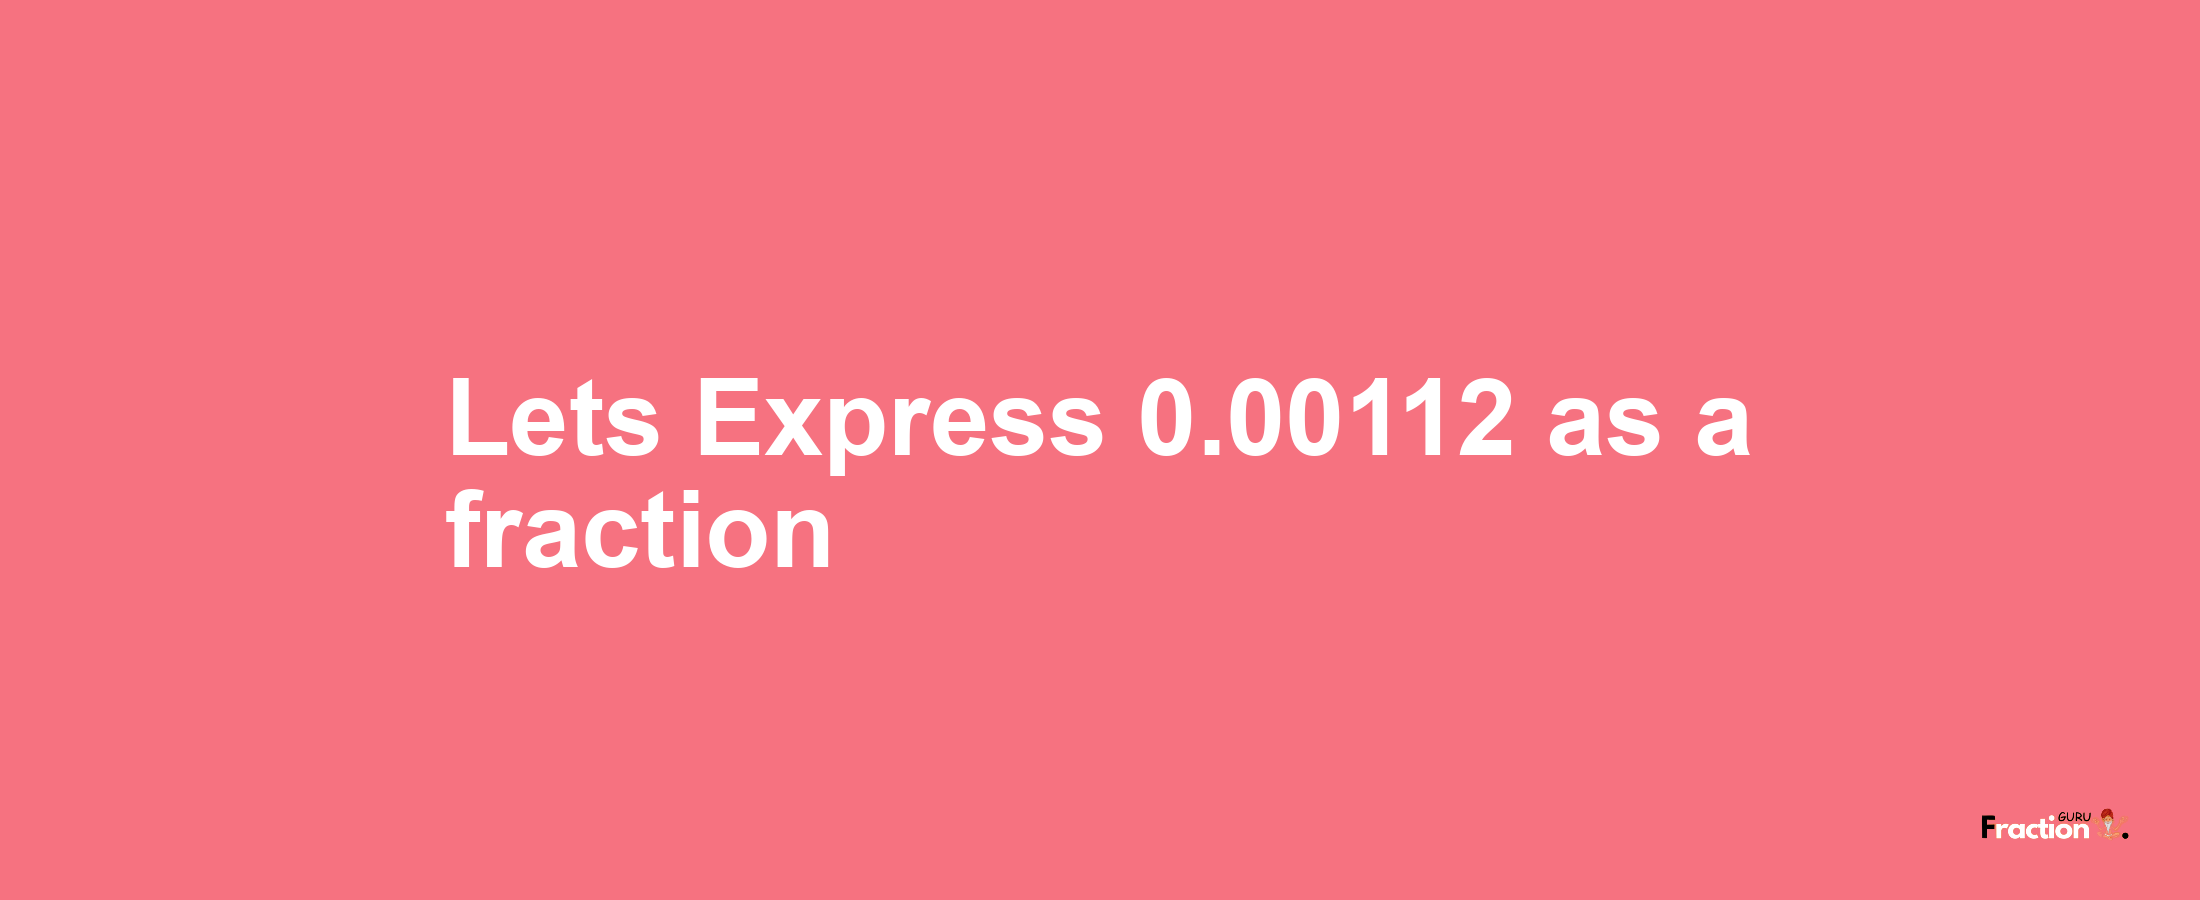 Lets Express 0.00112 as afraction